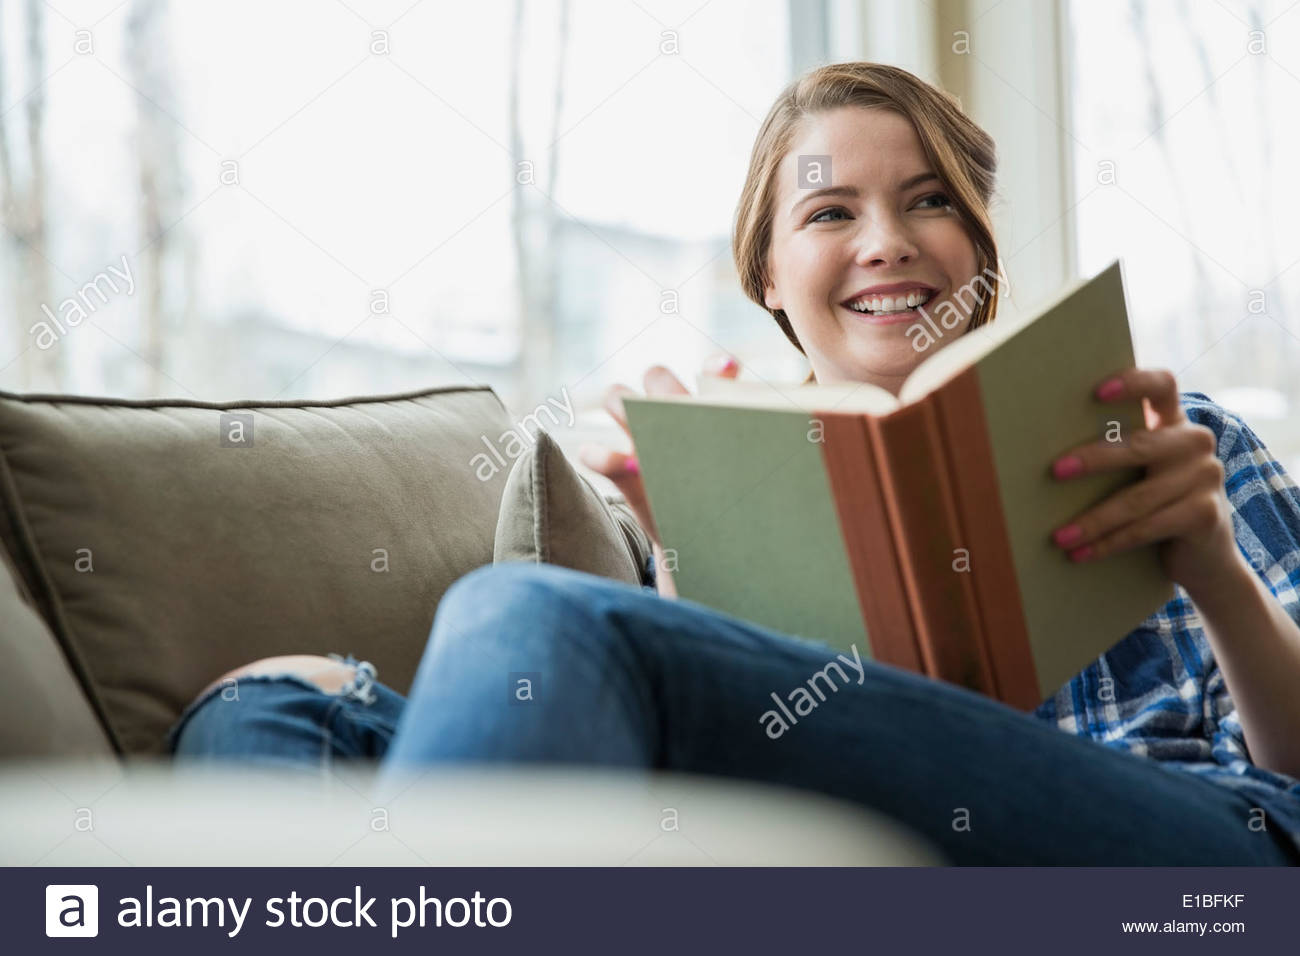 Woman reading book on sofa in living room Stock Photo